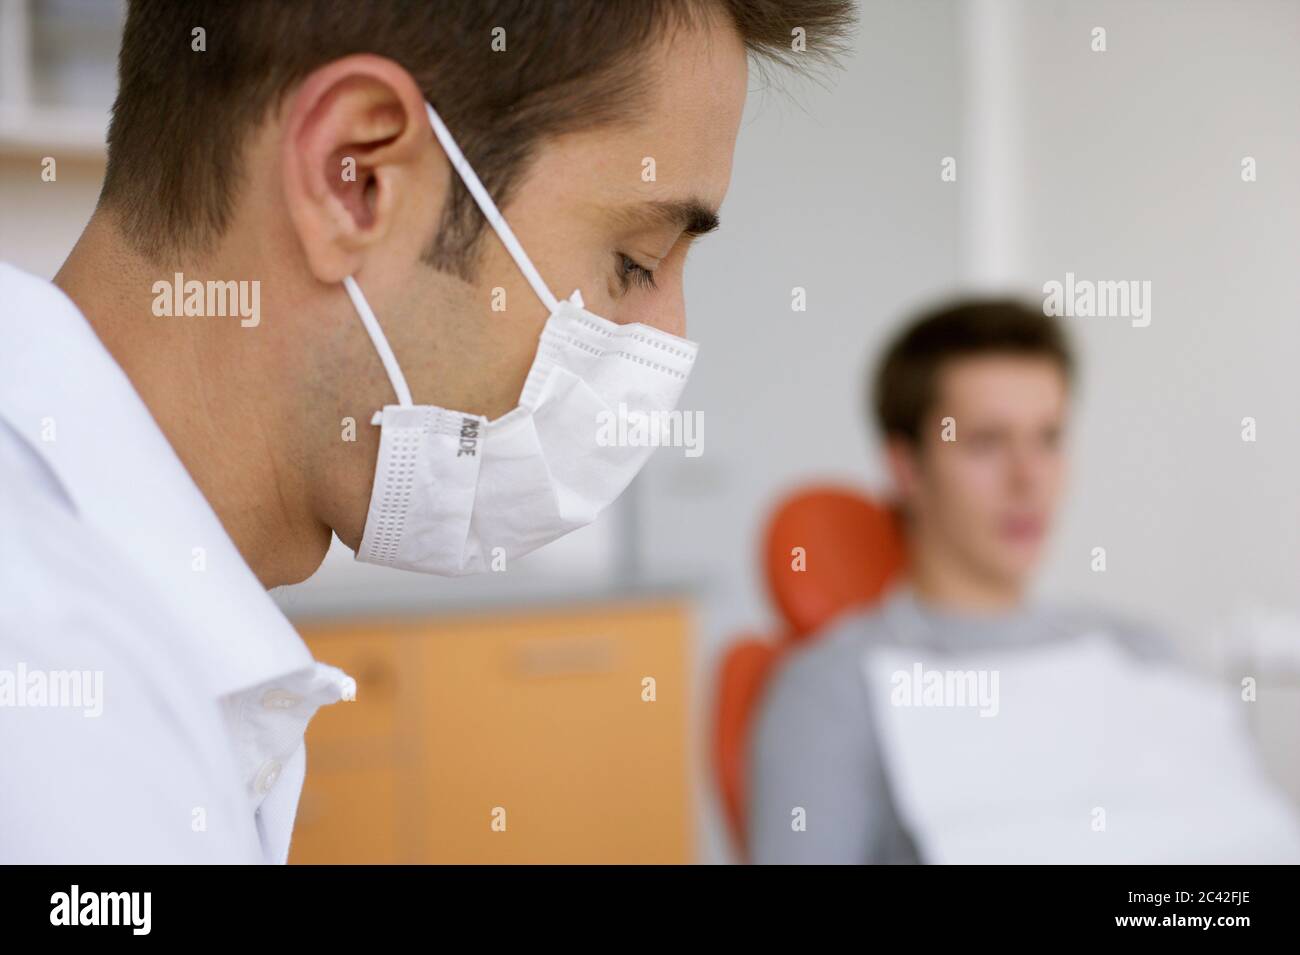 Dentist with face mask Stock Photo